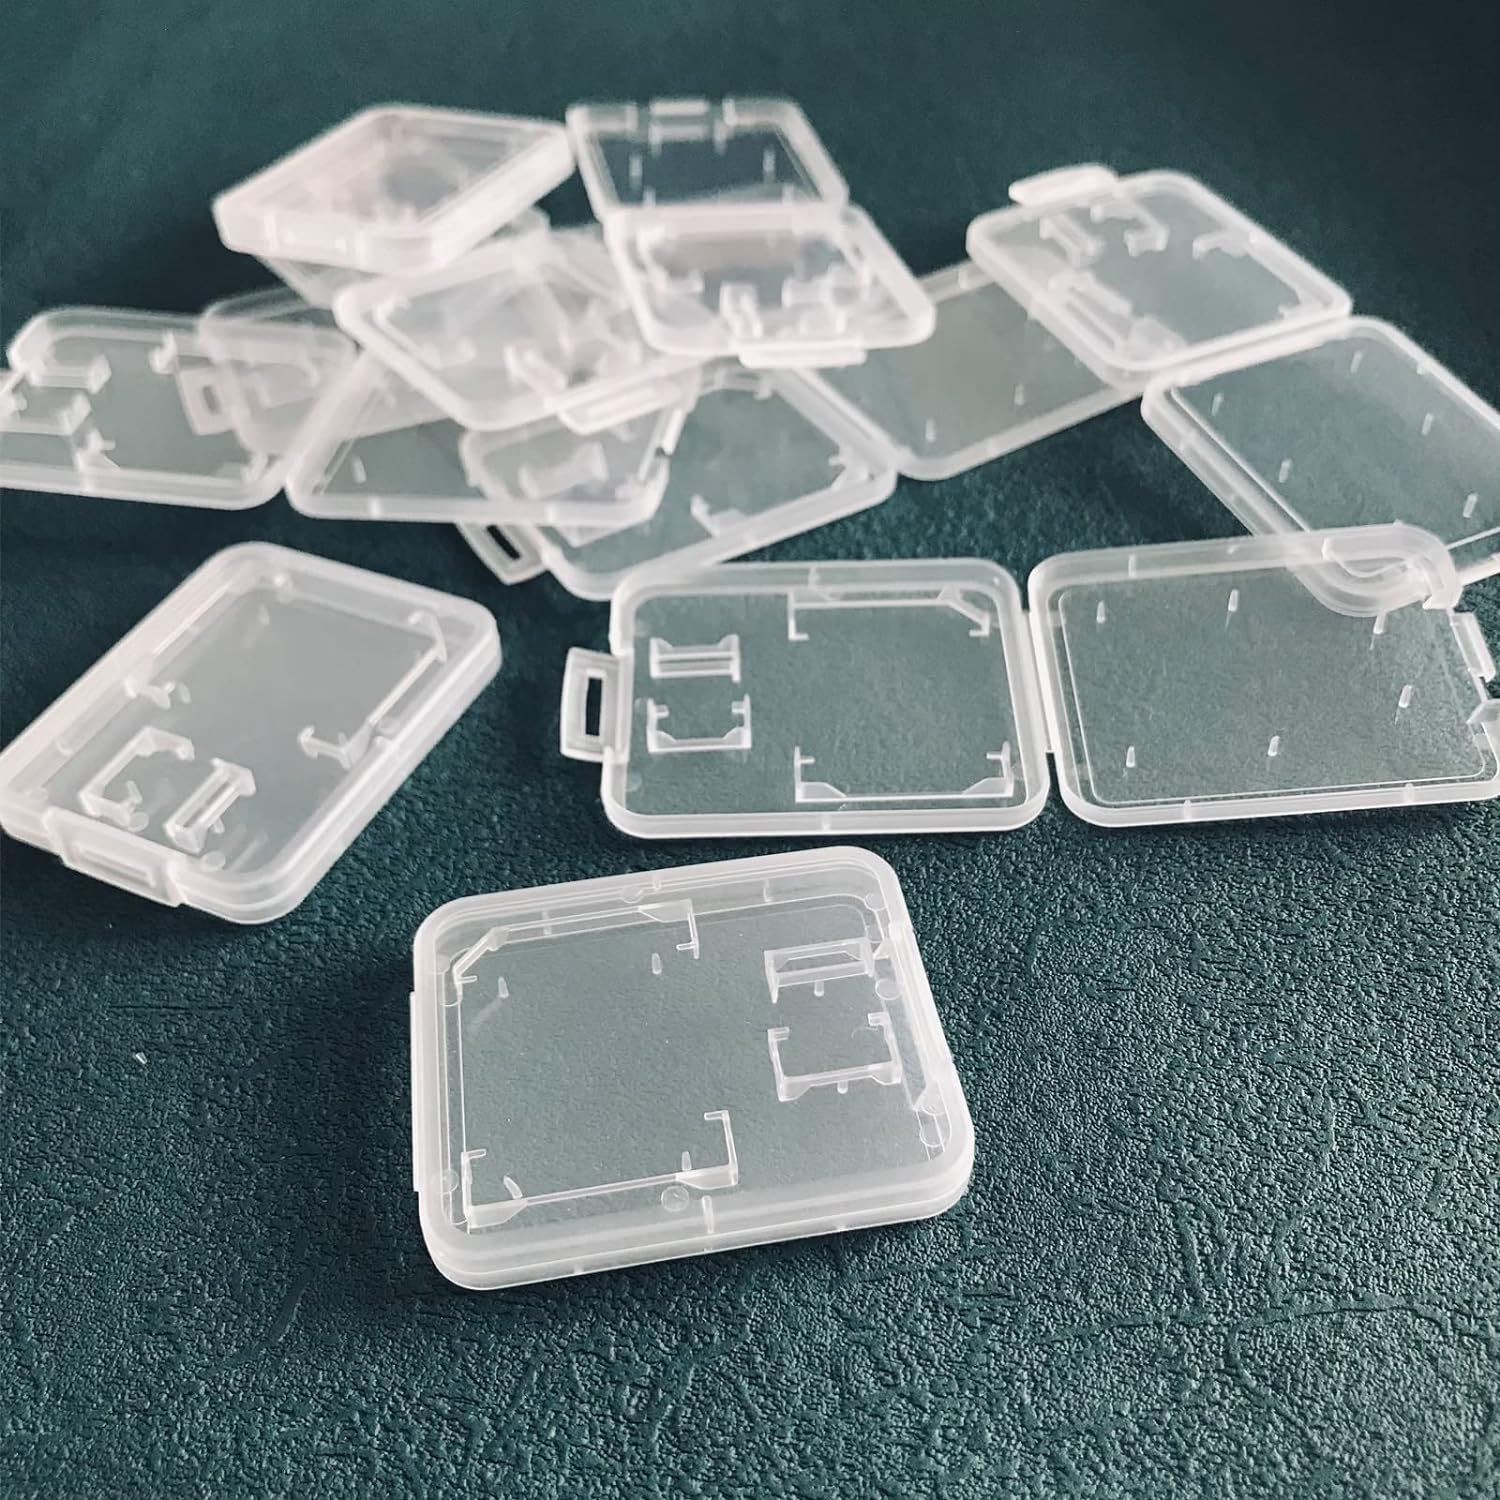 HYMAOME 20pcs Micro SD Card Storage Case Clear Plastic Memory Card Cases Little Containers for SD Card/Adapter, T-Flash/Micro SD Card